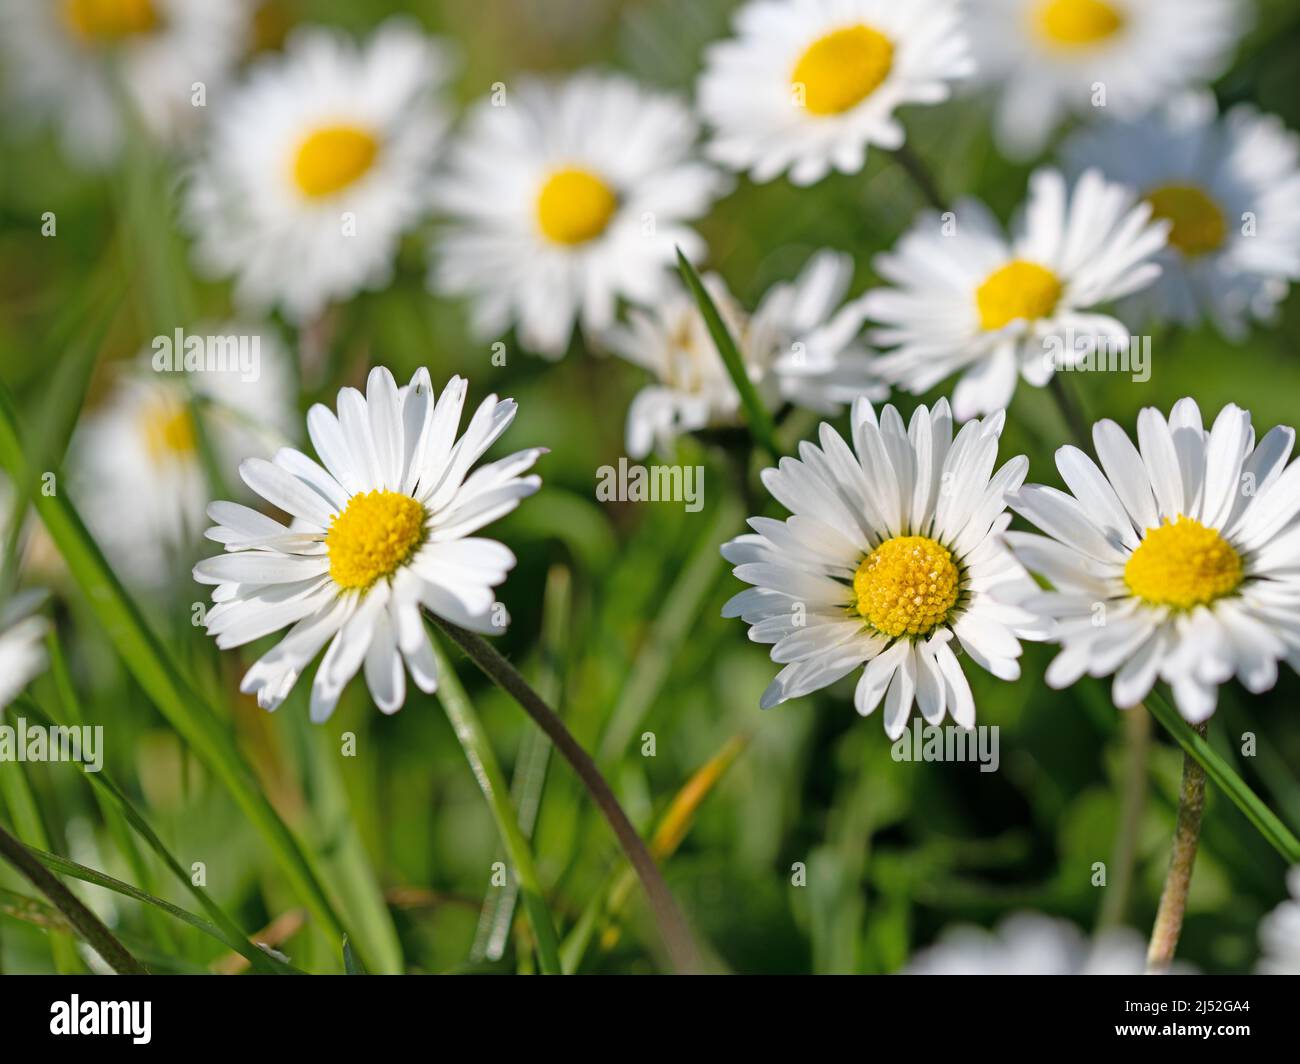 Daisies, Bellis perennis, in a close-up Stock Photo